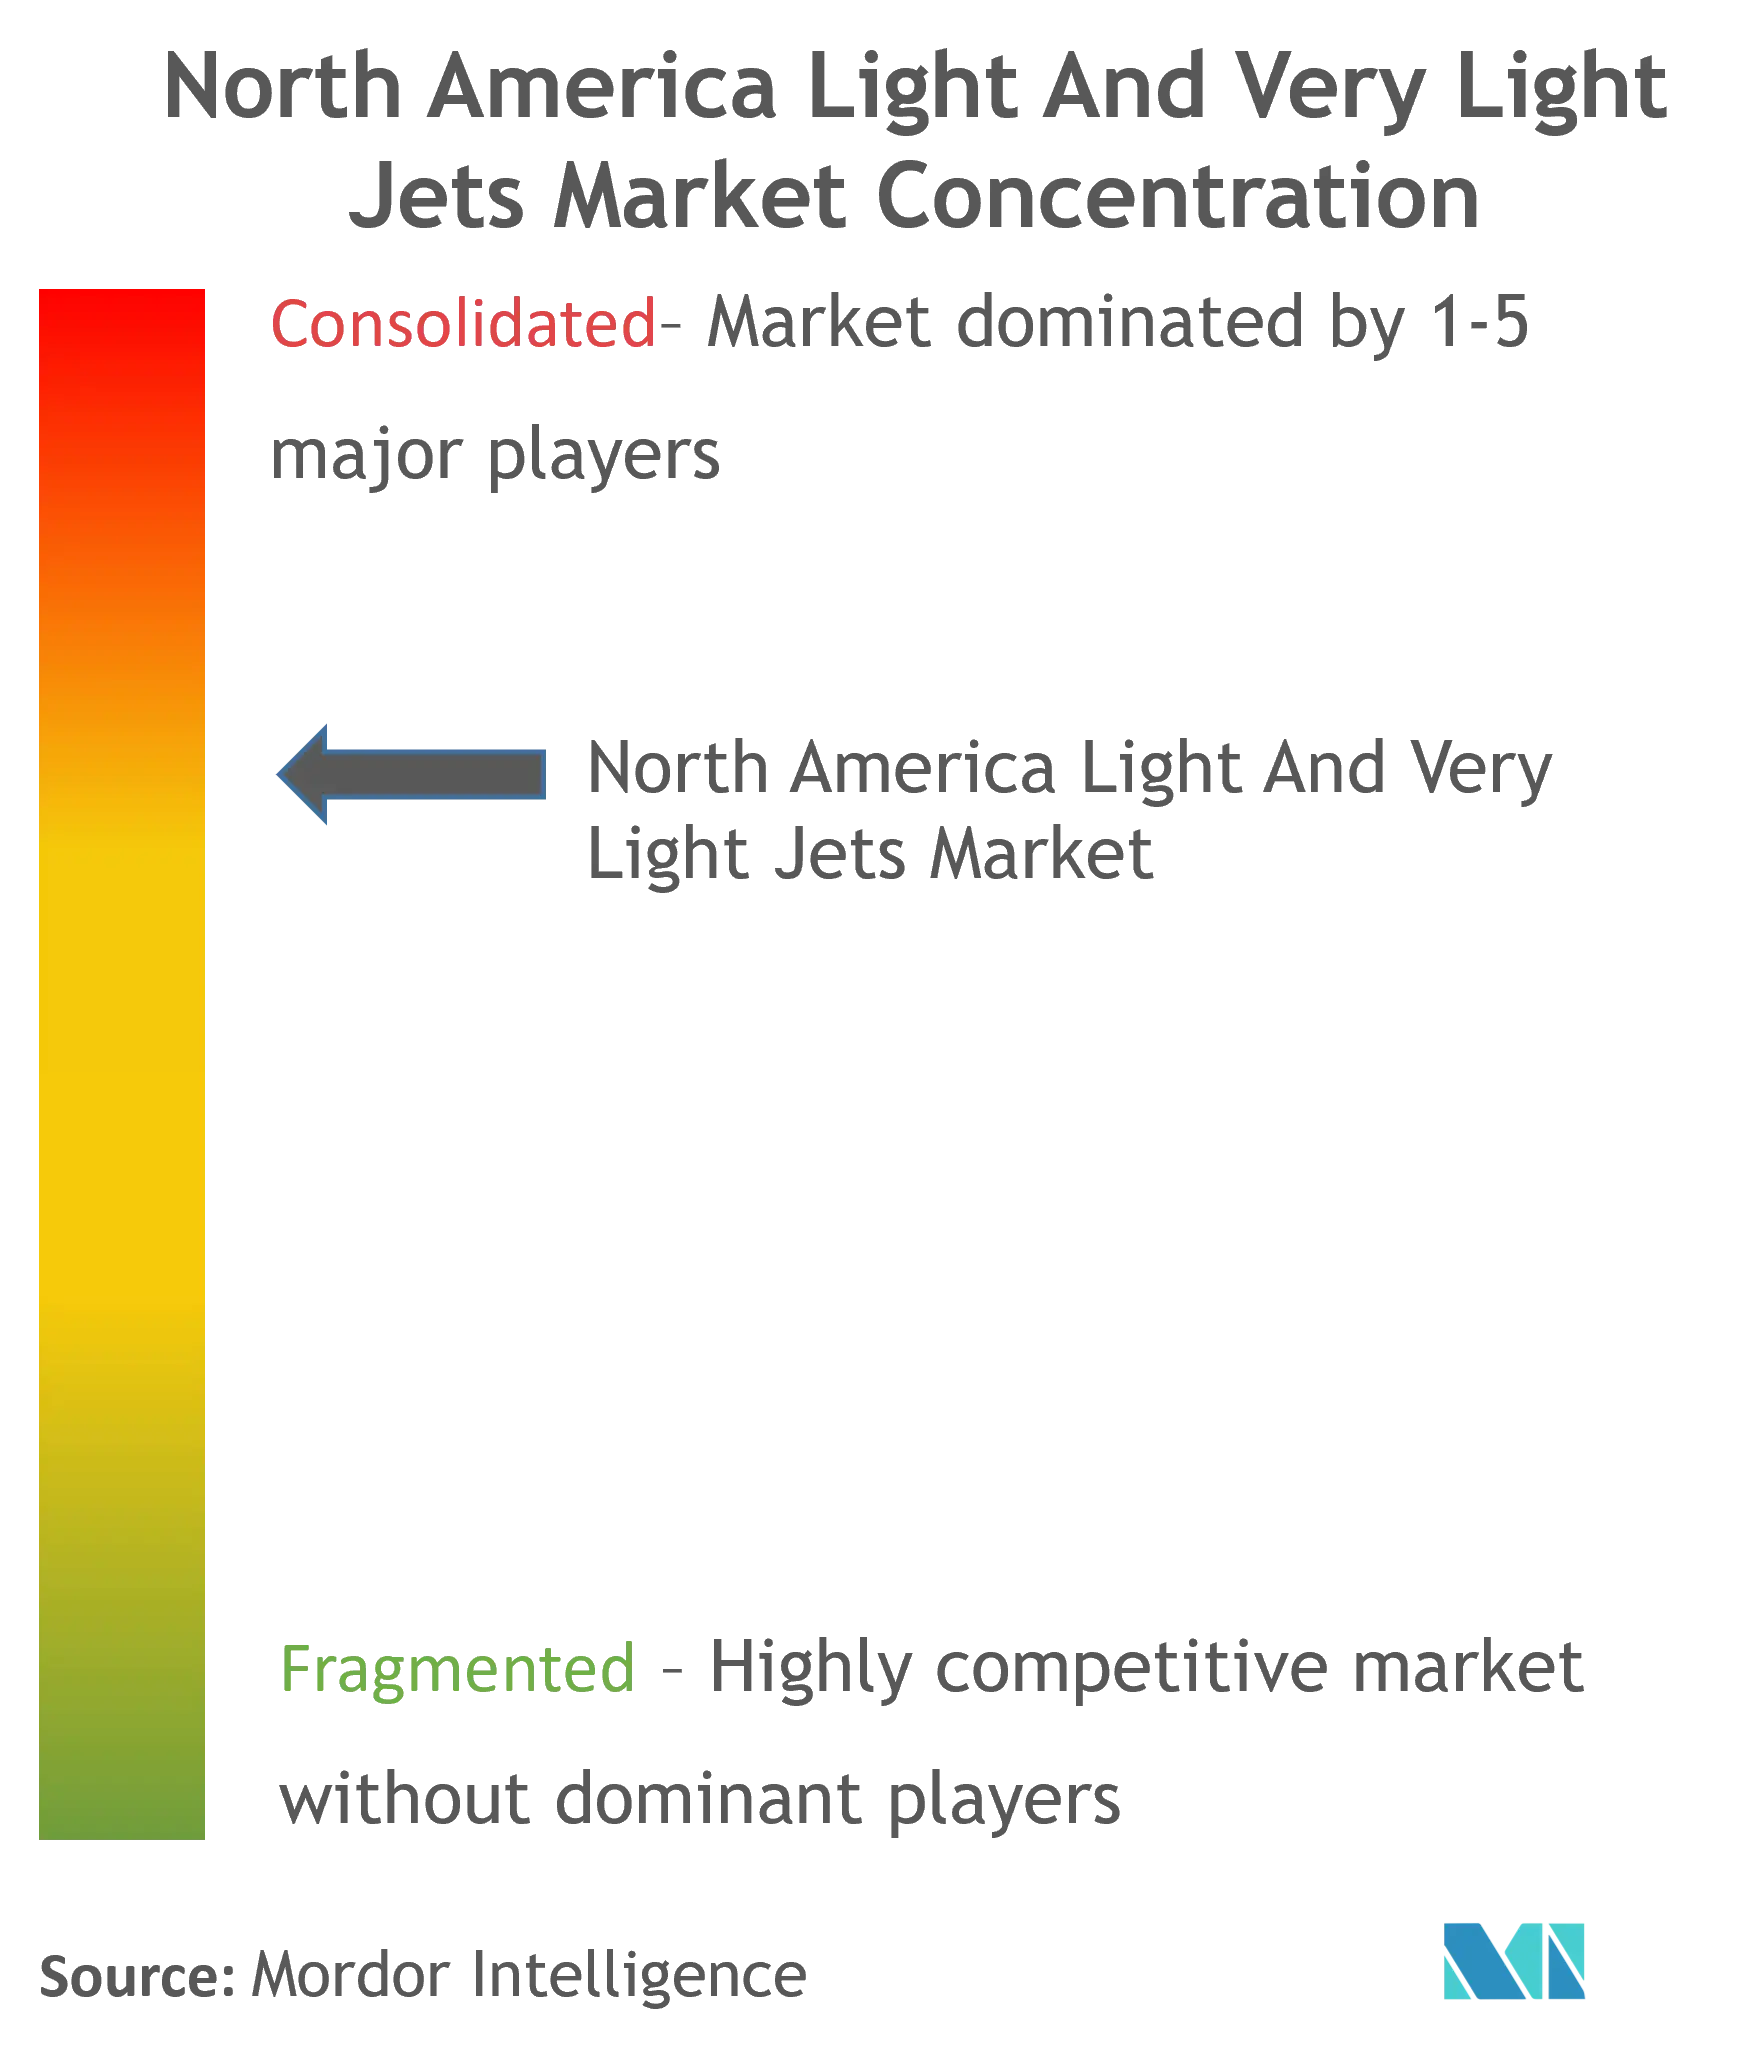 North America Light And Very Light Jets Market Concentration